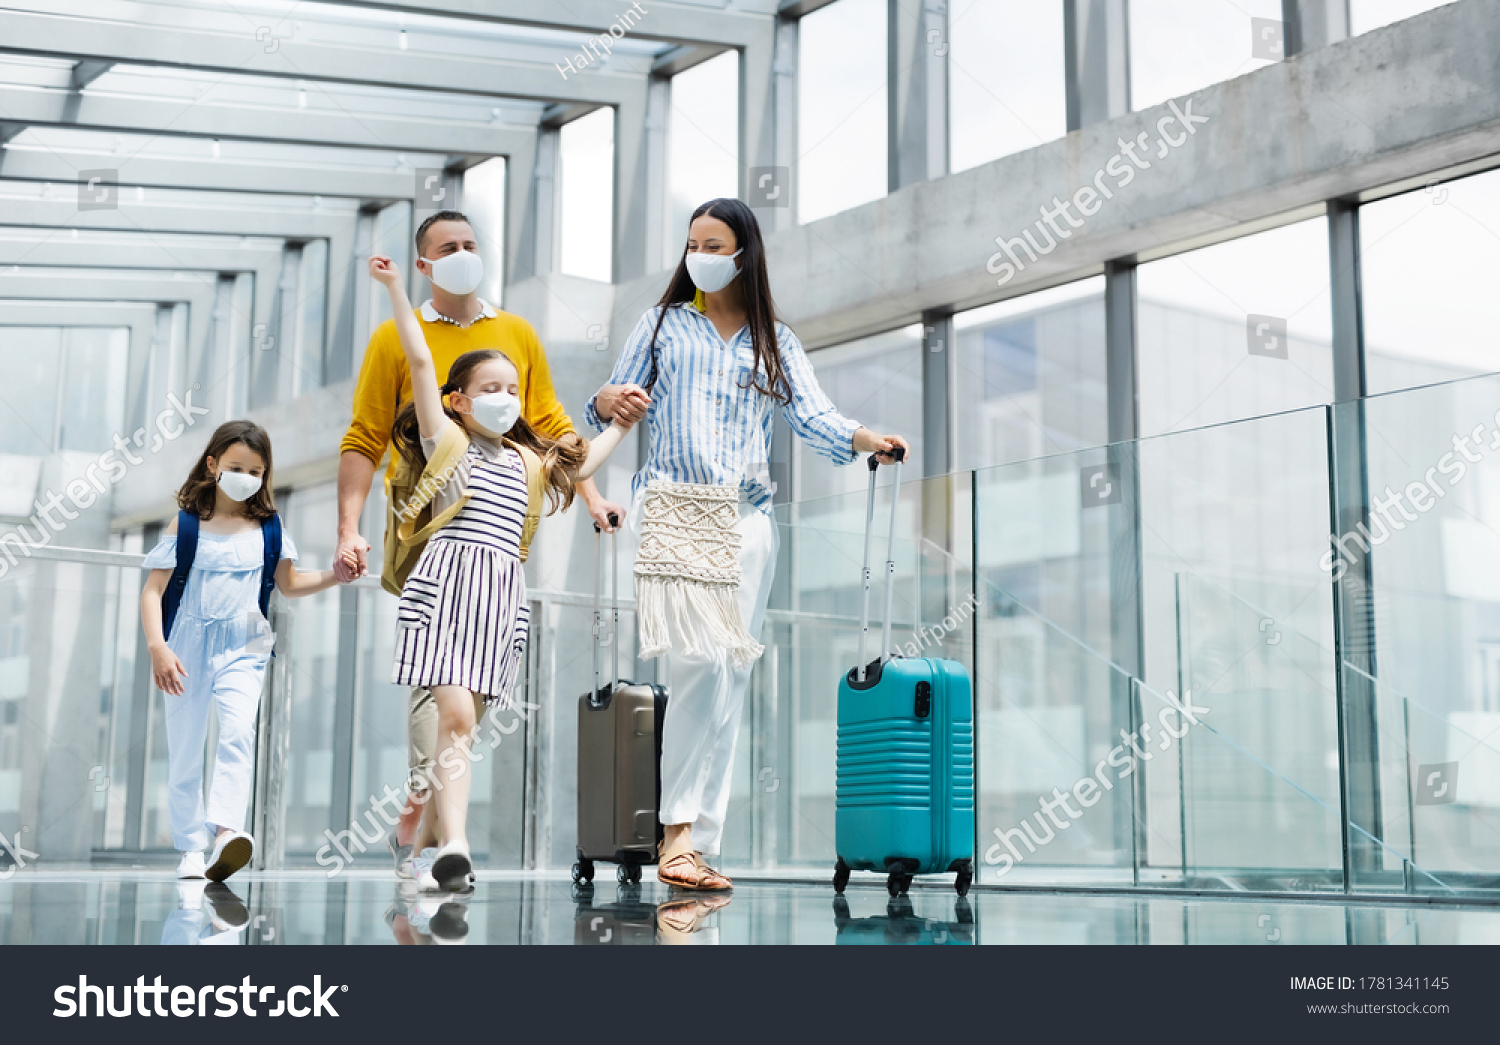 Family with two children going on holiday, wearing face masks at the airport. #1781341145